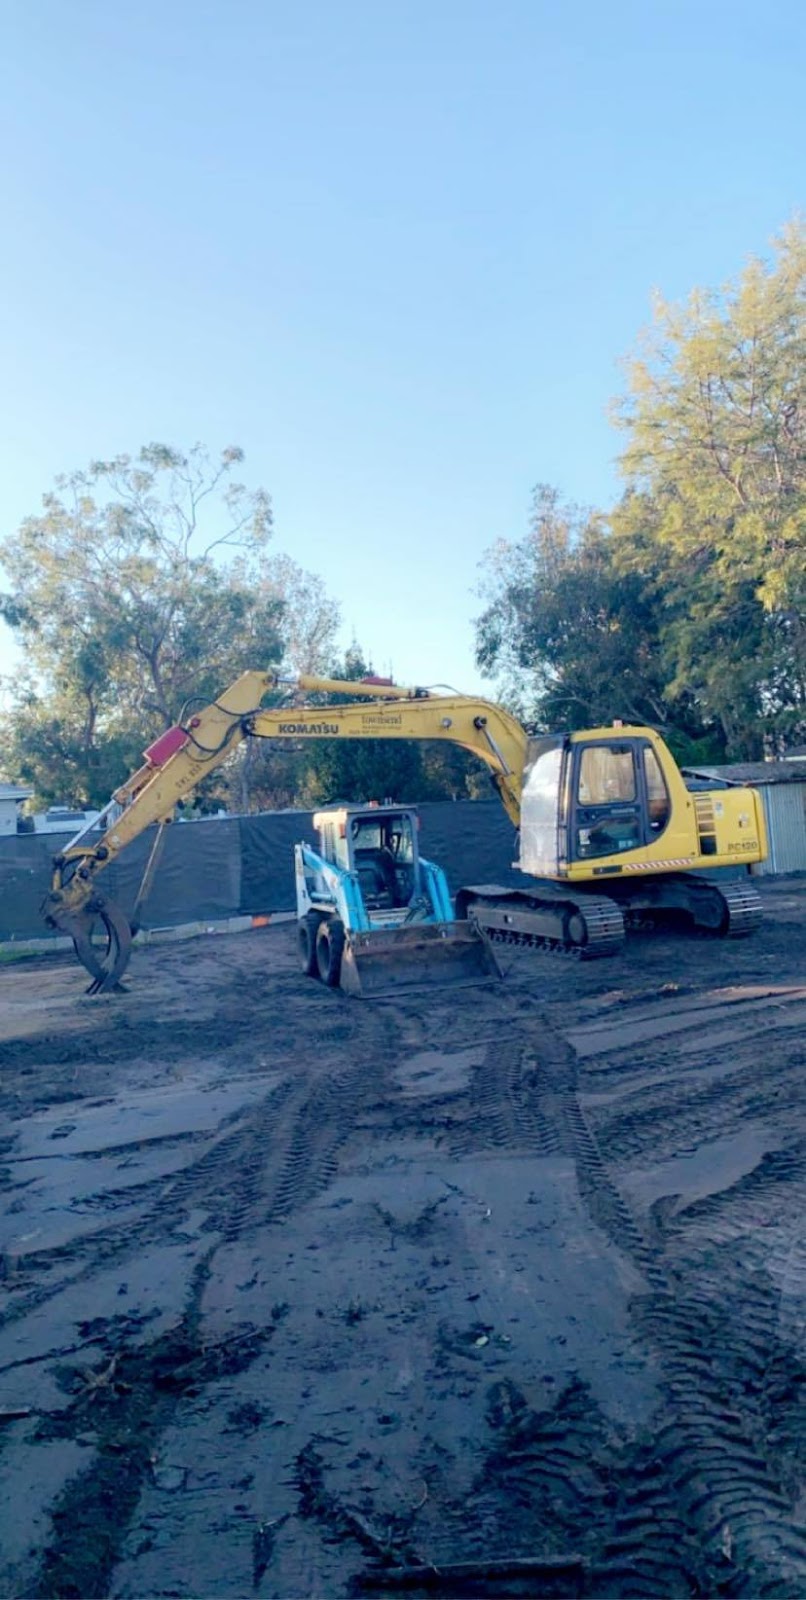 Townsend Demolition and Salvage | general contractor | 127 Forge Creek Rd, Bairnsdale VIC 3875, Australia | 0428969933 OR +61 428 969 933